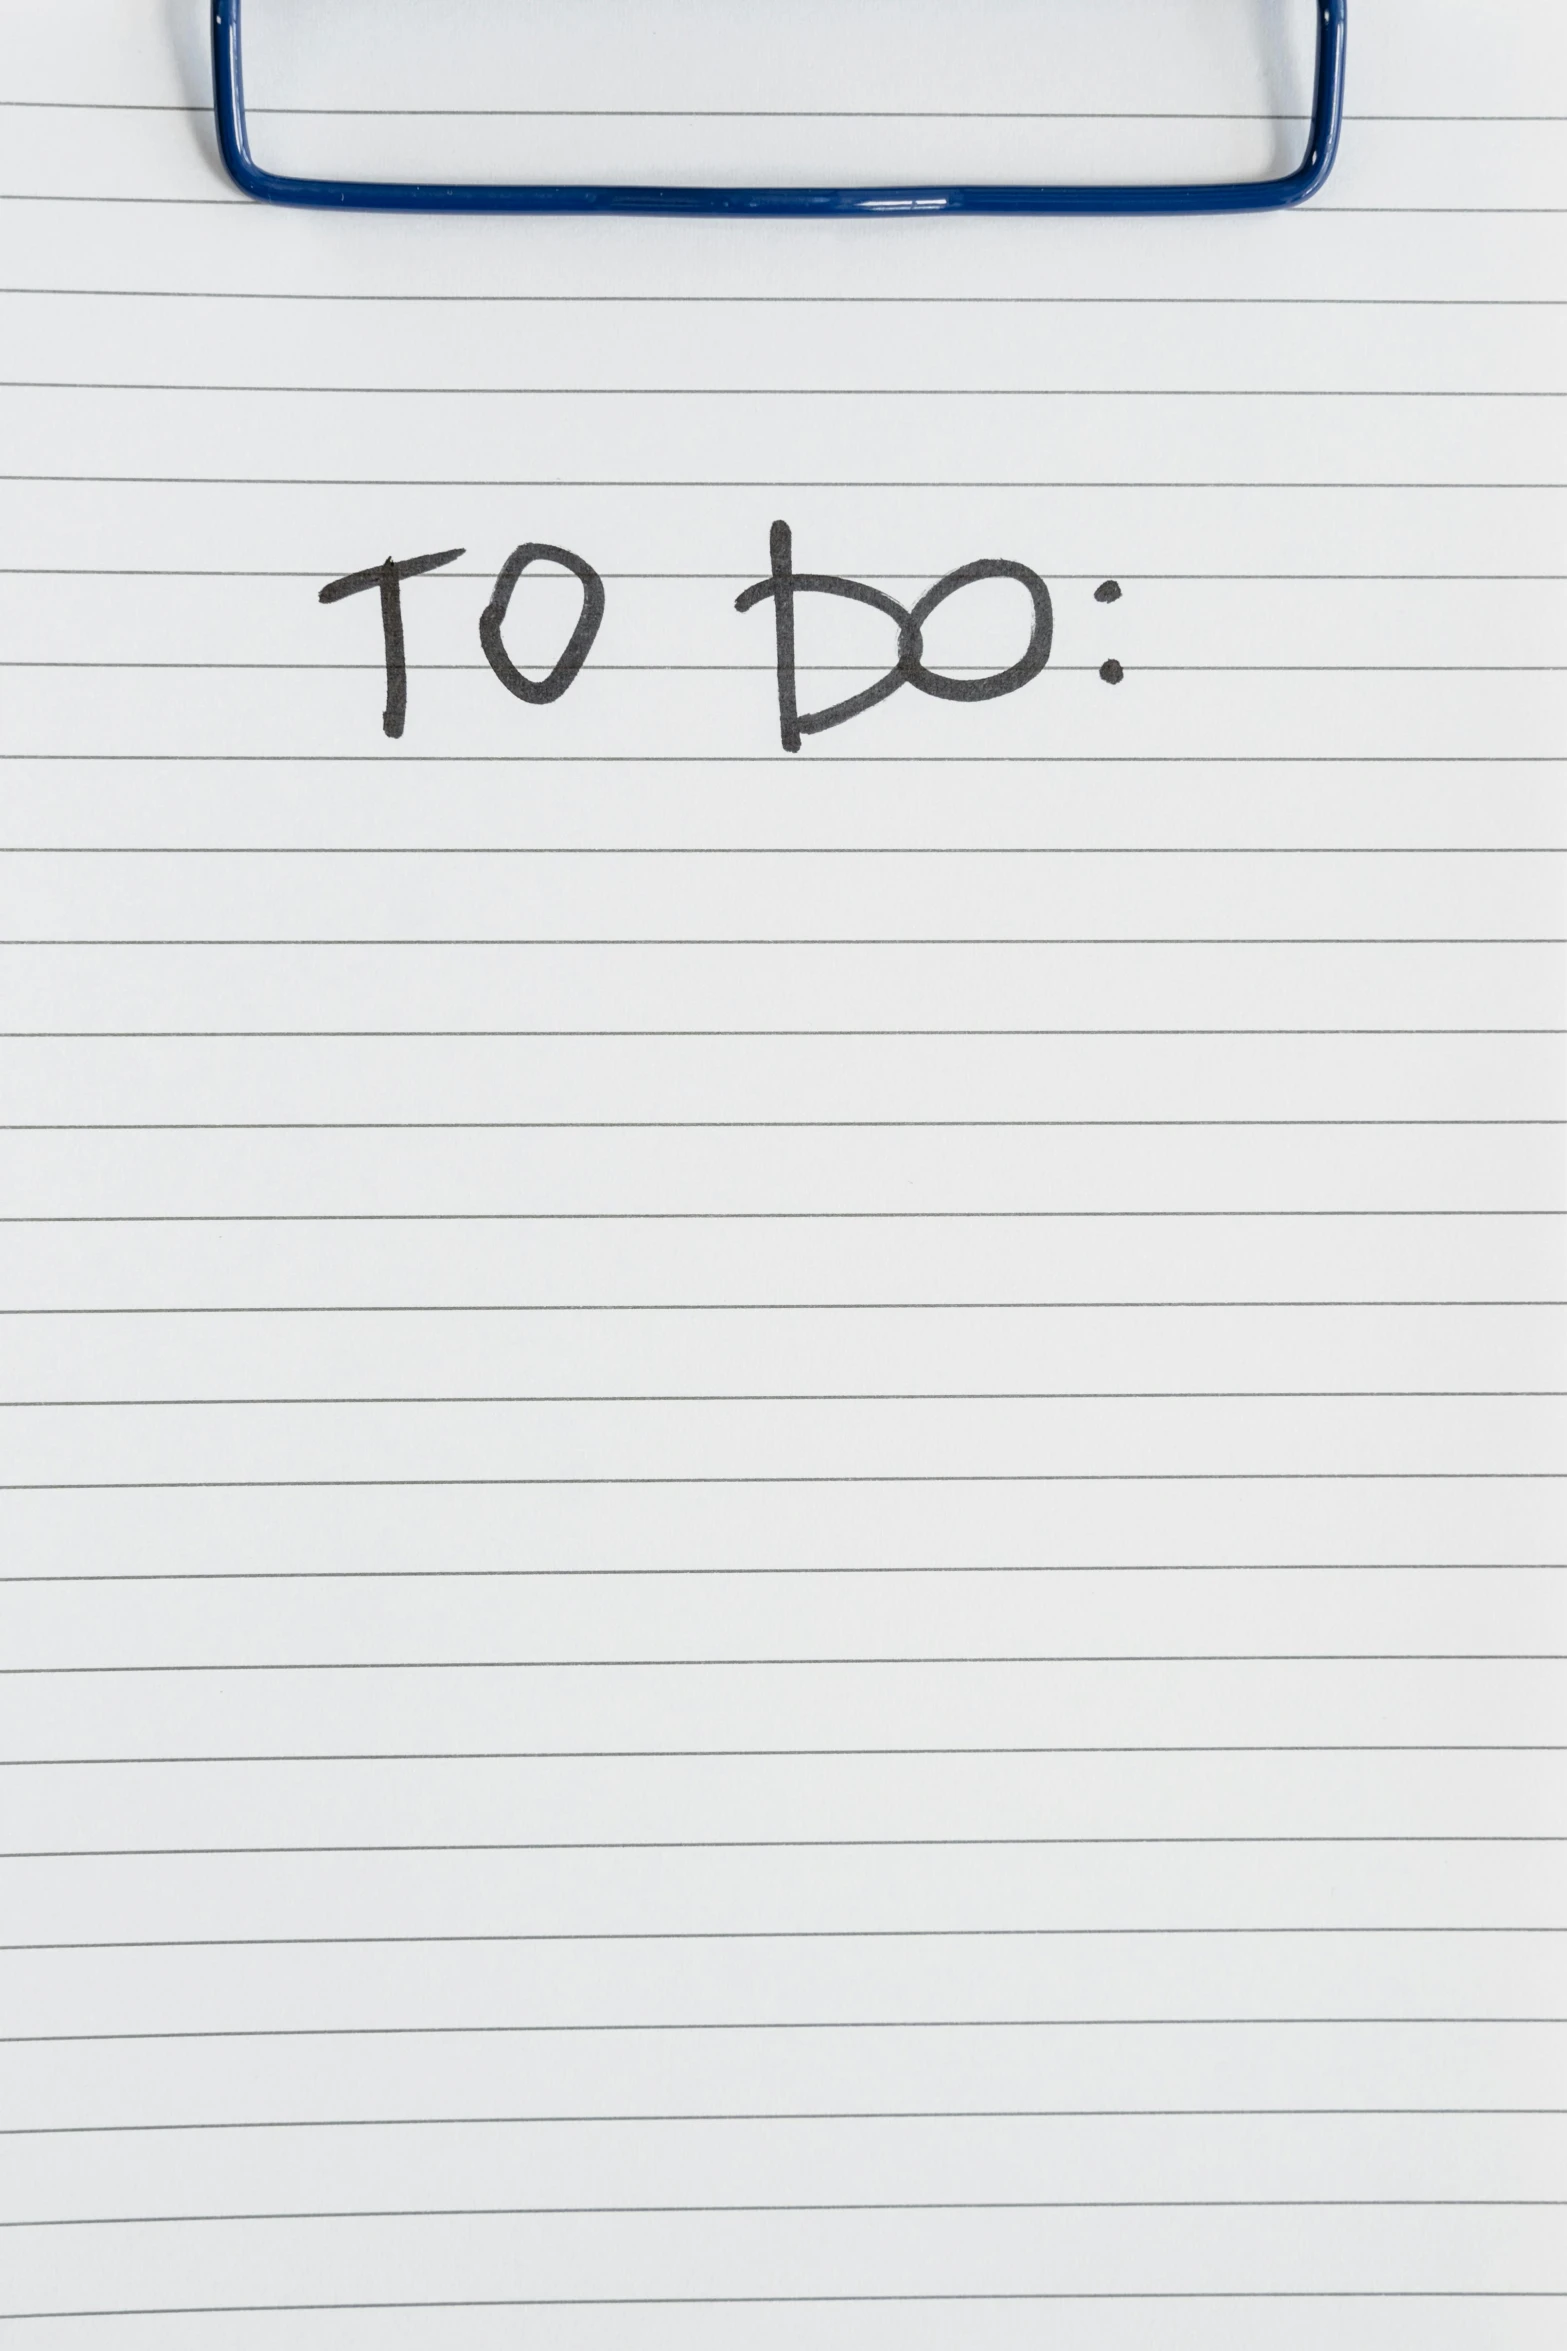 a clipboard with the word to do written on it, an album cover, by Agnes Martin, unsplash, 2 5 6 x 2 5 6, terry richardson, frank ocean, whiteboards